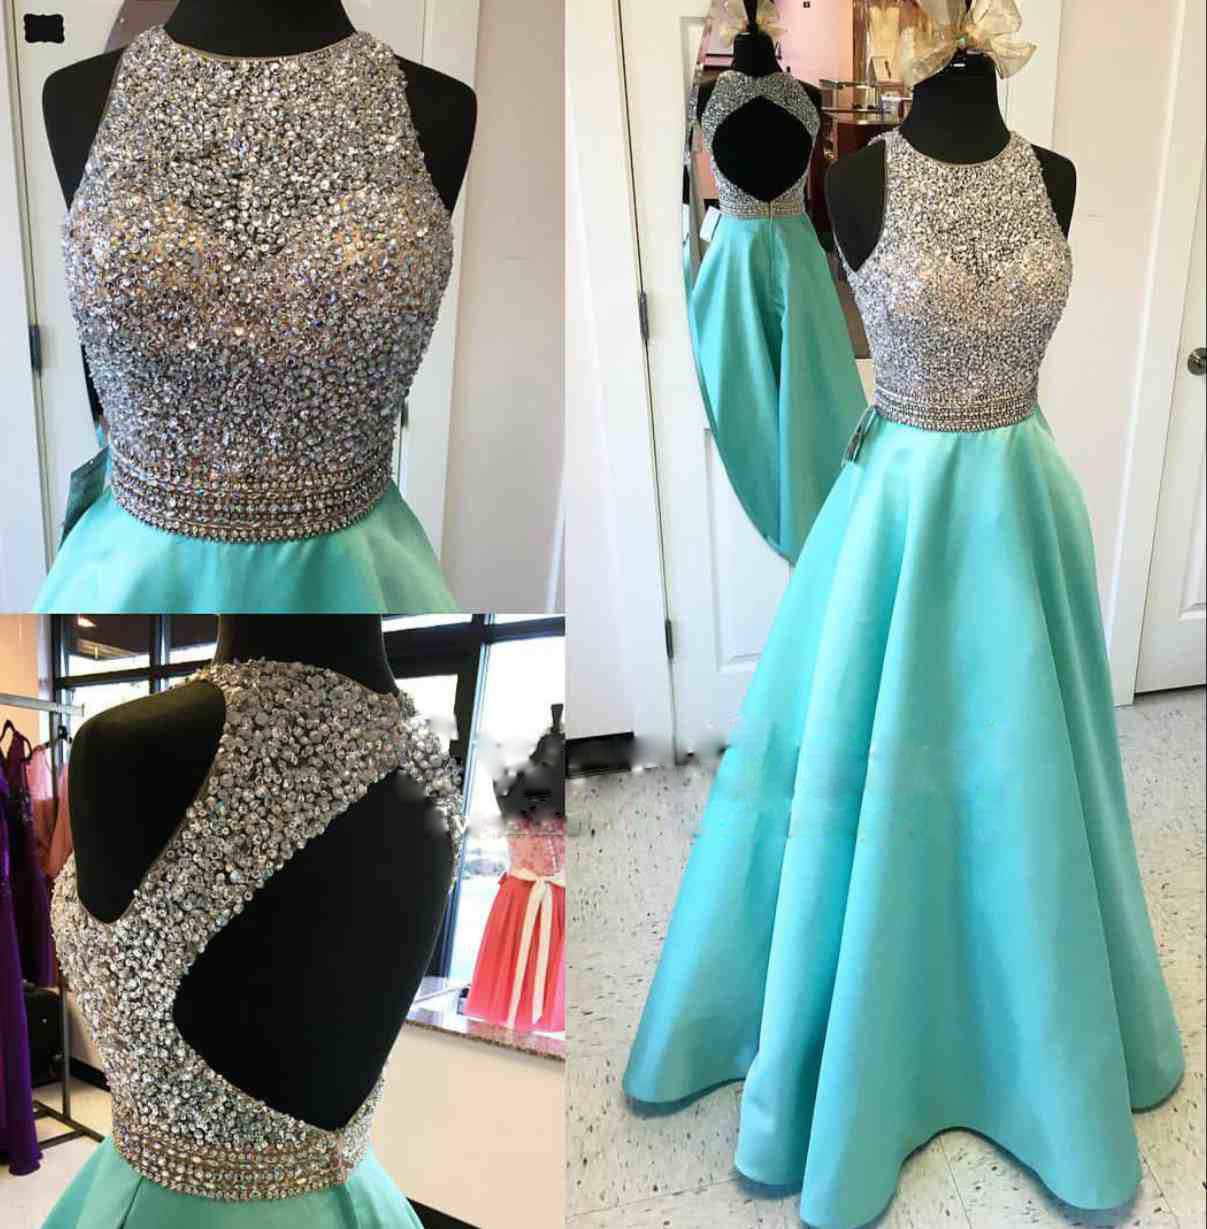 Long Satin A-line Beaded Sequins Party Cocktail Dress Backless Prom Dress Formal Gowns Evevning Dresses Long Sequins Homecoming Dresses